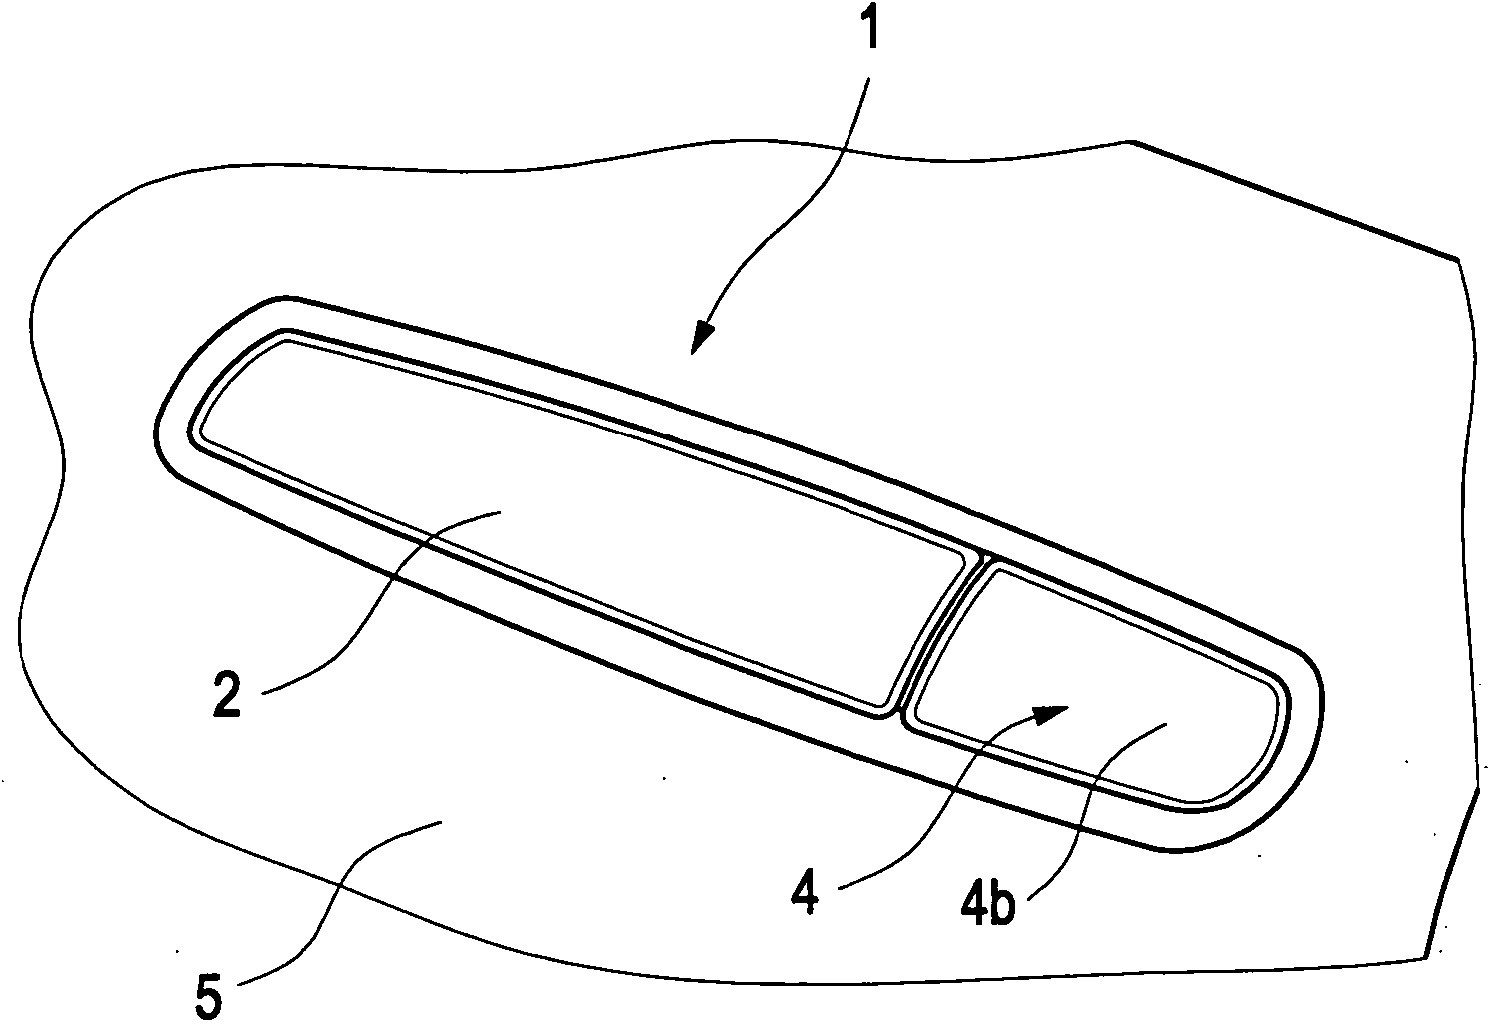 Door handle assembly for a vehicle